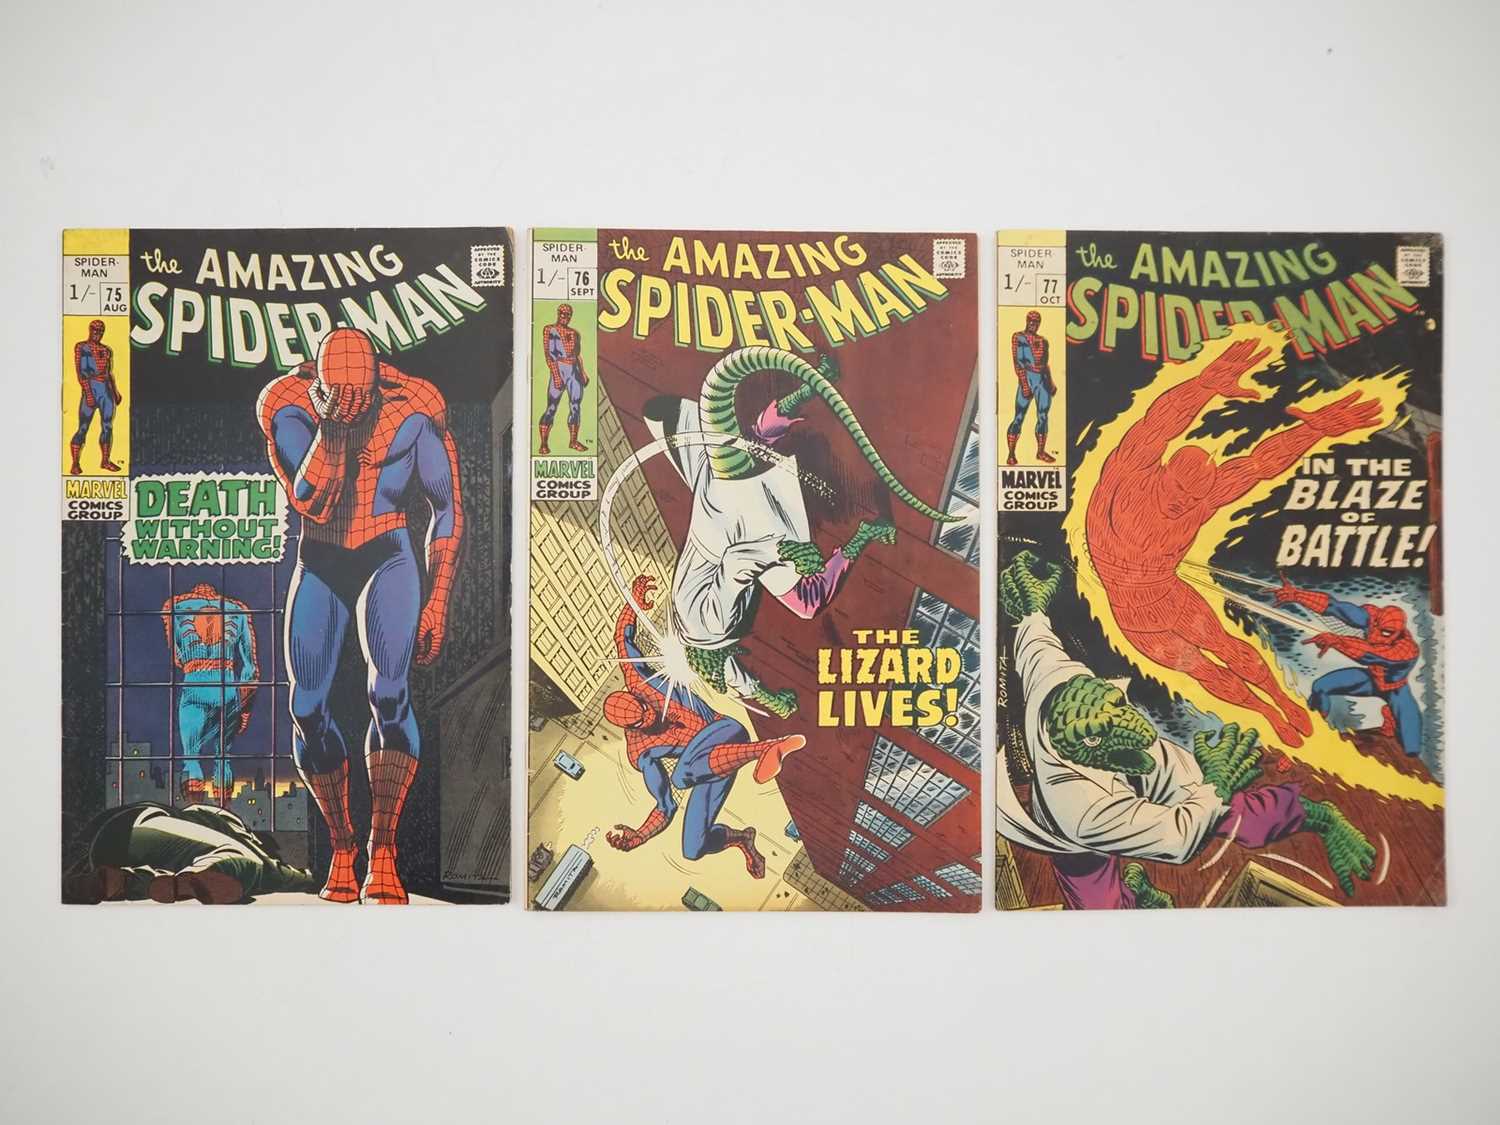 AMAZING SPIDER-MAN #75, 76, 77 (3 in Lot) - (1969 - MARVEL - UK Price Variant) - Includes the '